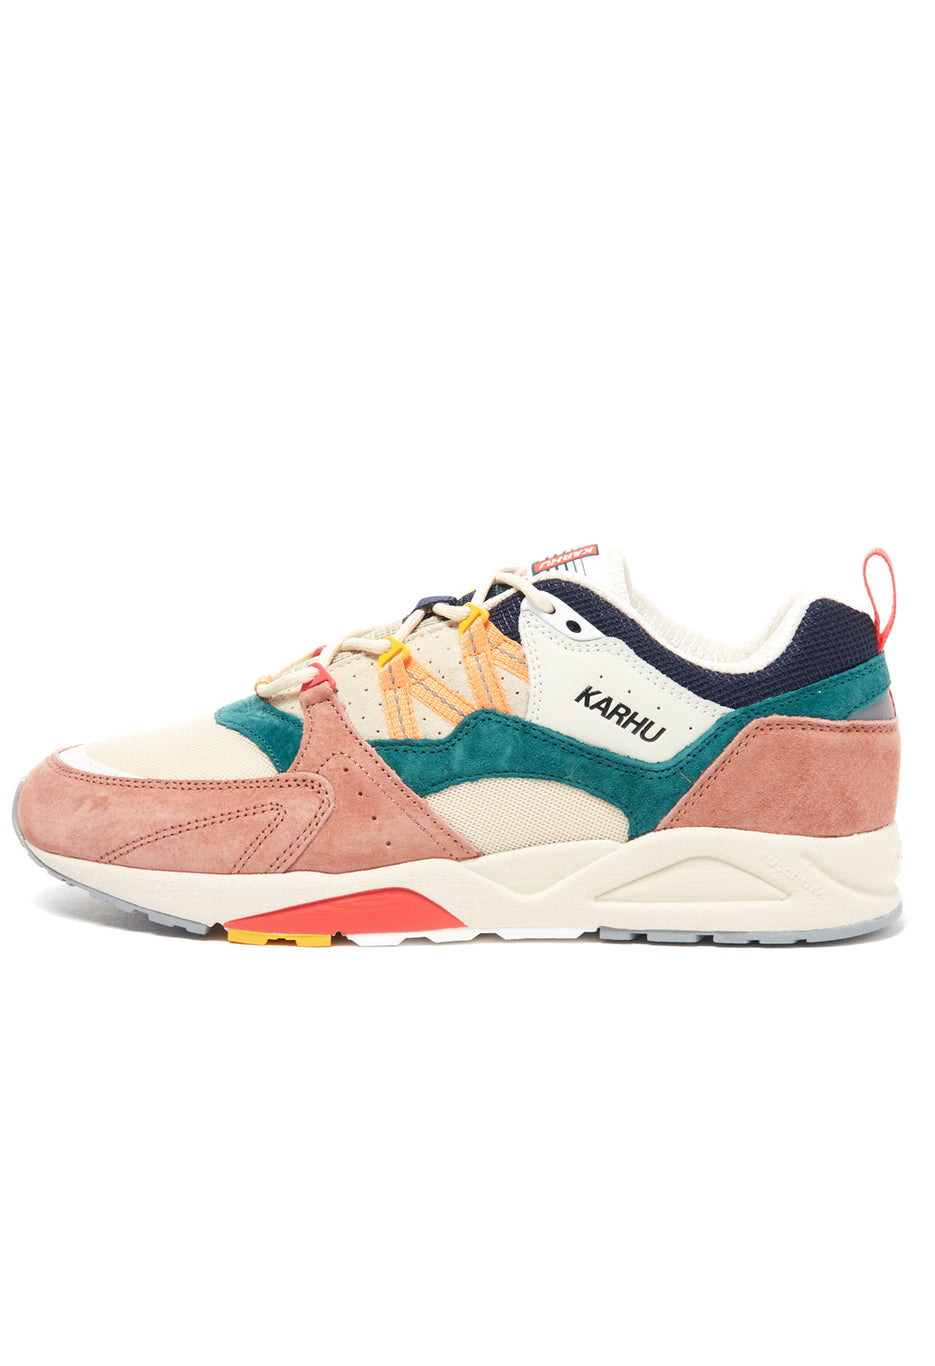 Karhu Fusion 2.0 Trainers - Lily White / Piquant Green